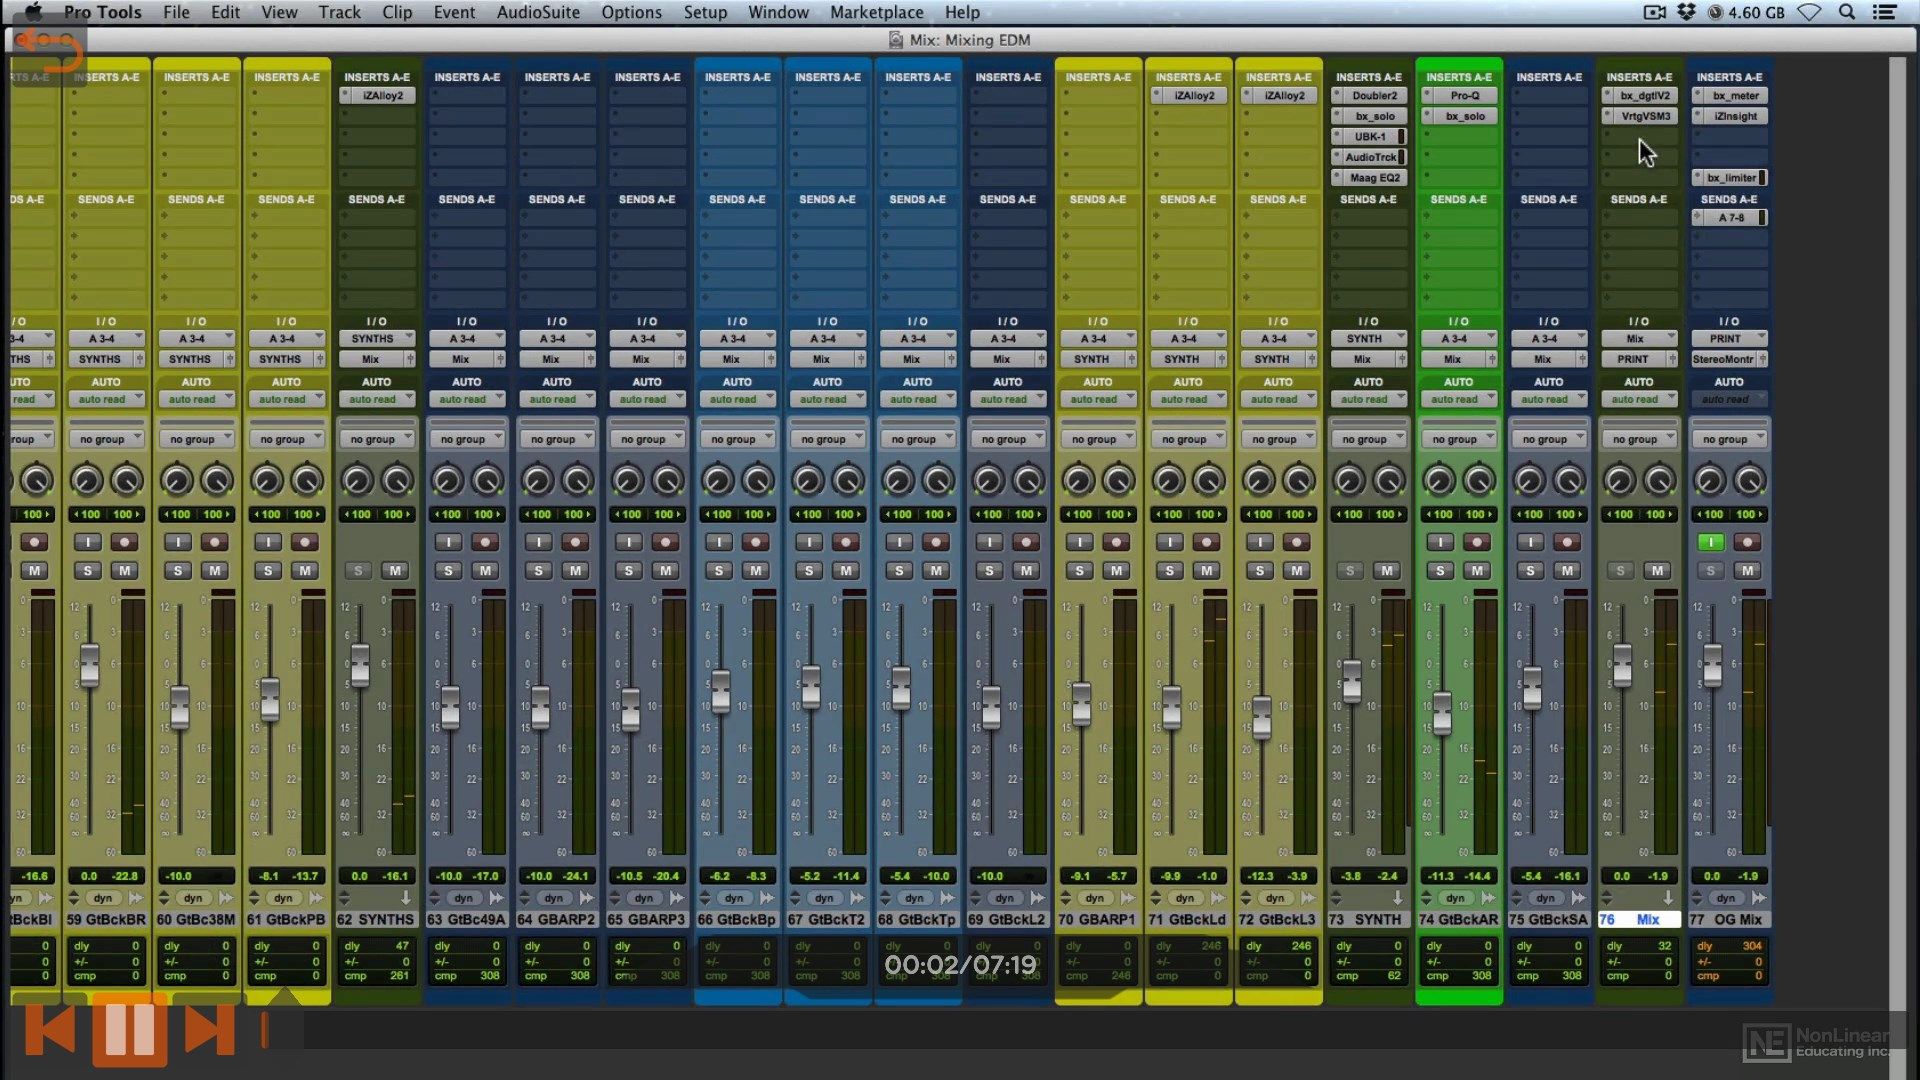 Mixing EDM Course For Pro Tools by AV